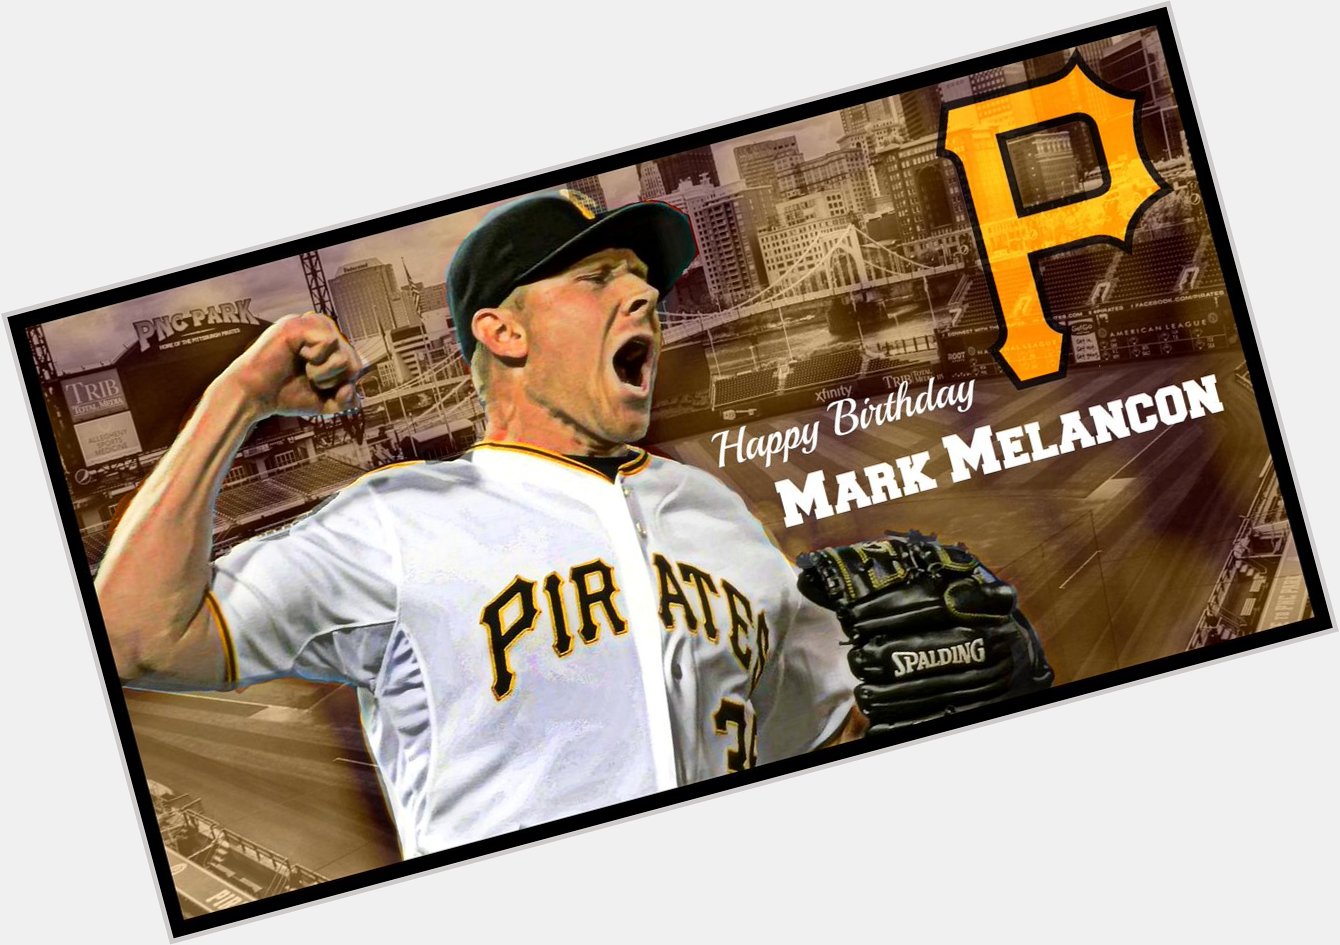 Wishing Pittsburgh Pirates closer a very Happy 30th BDay! Heres to another year of living your dreams 